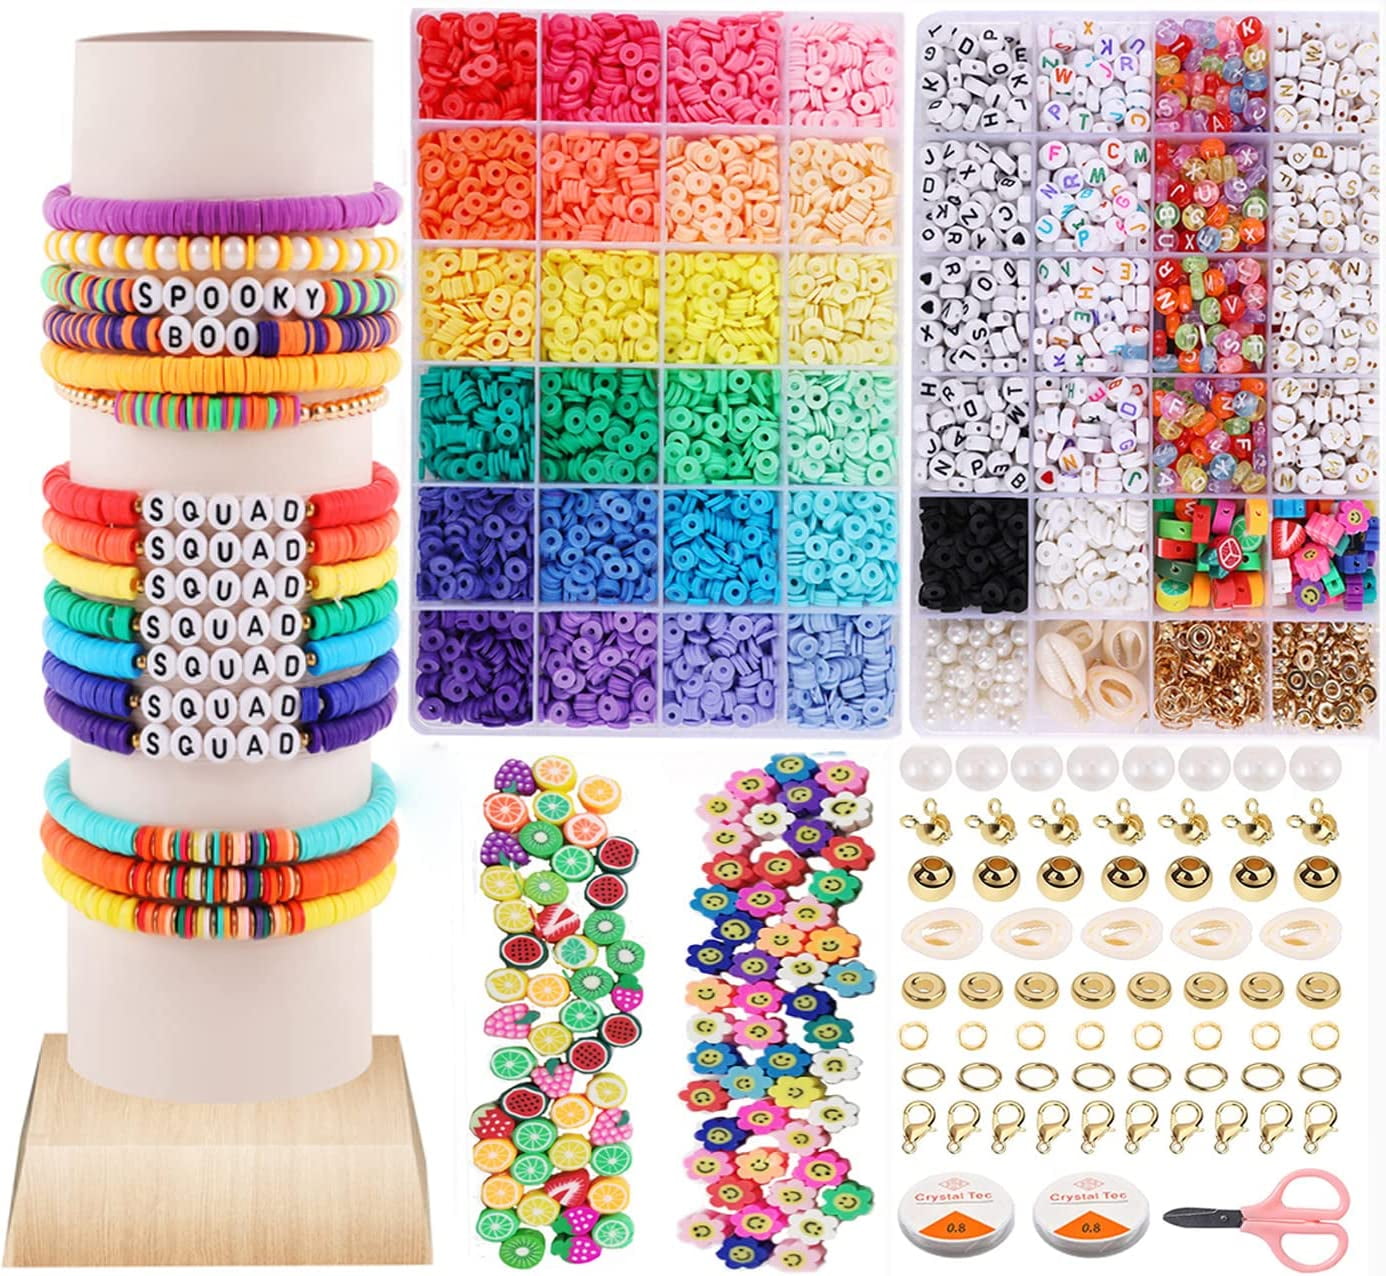 27,500 Pcs Fuse Beads Kit for Kids Crafts, 30 Colors Iron Beads Set with 3 Pegboards, 5 Ironing Paper, 10 Patterns, Gifts for Birthday Christmas